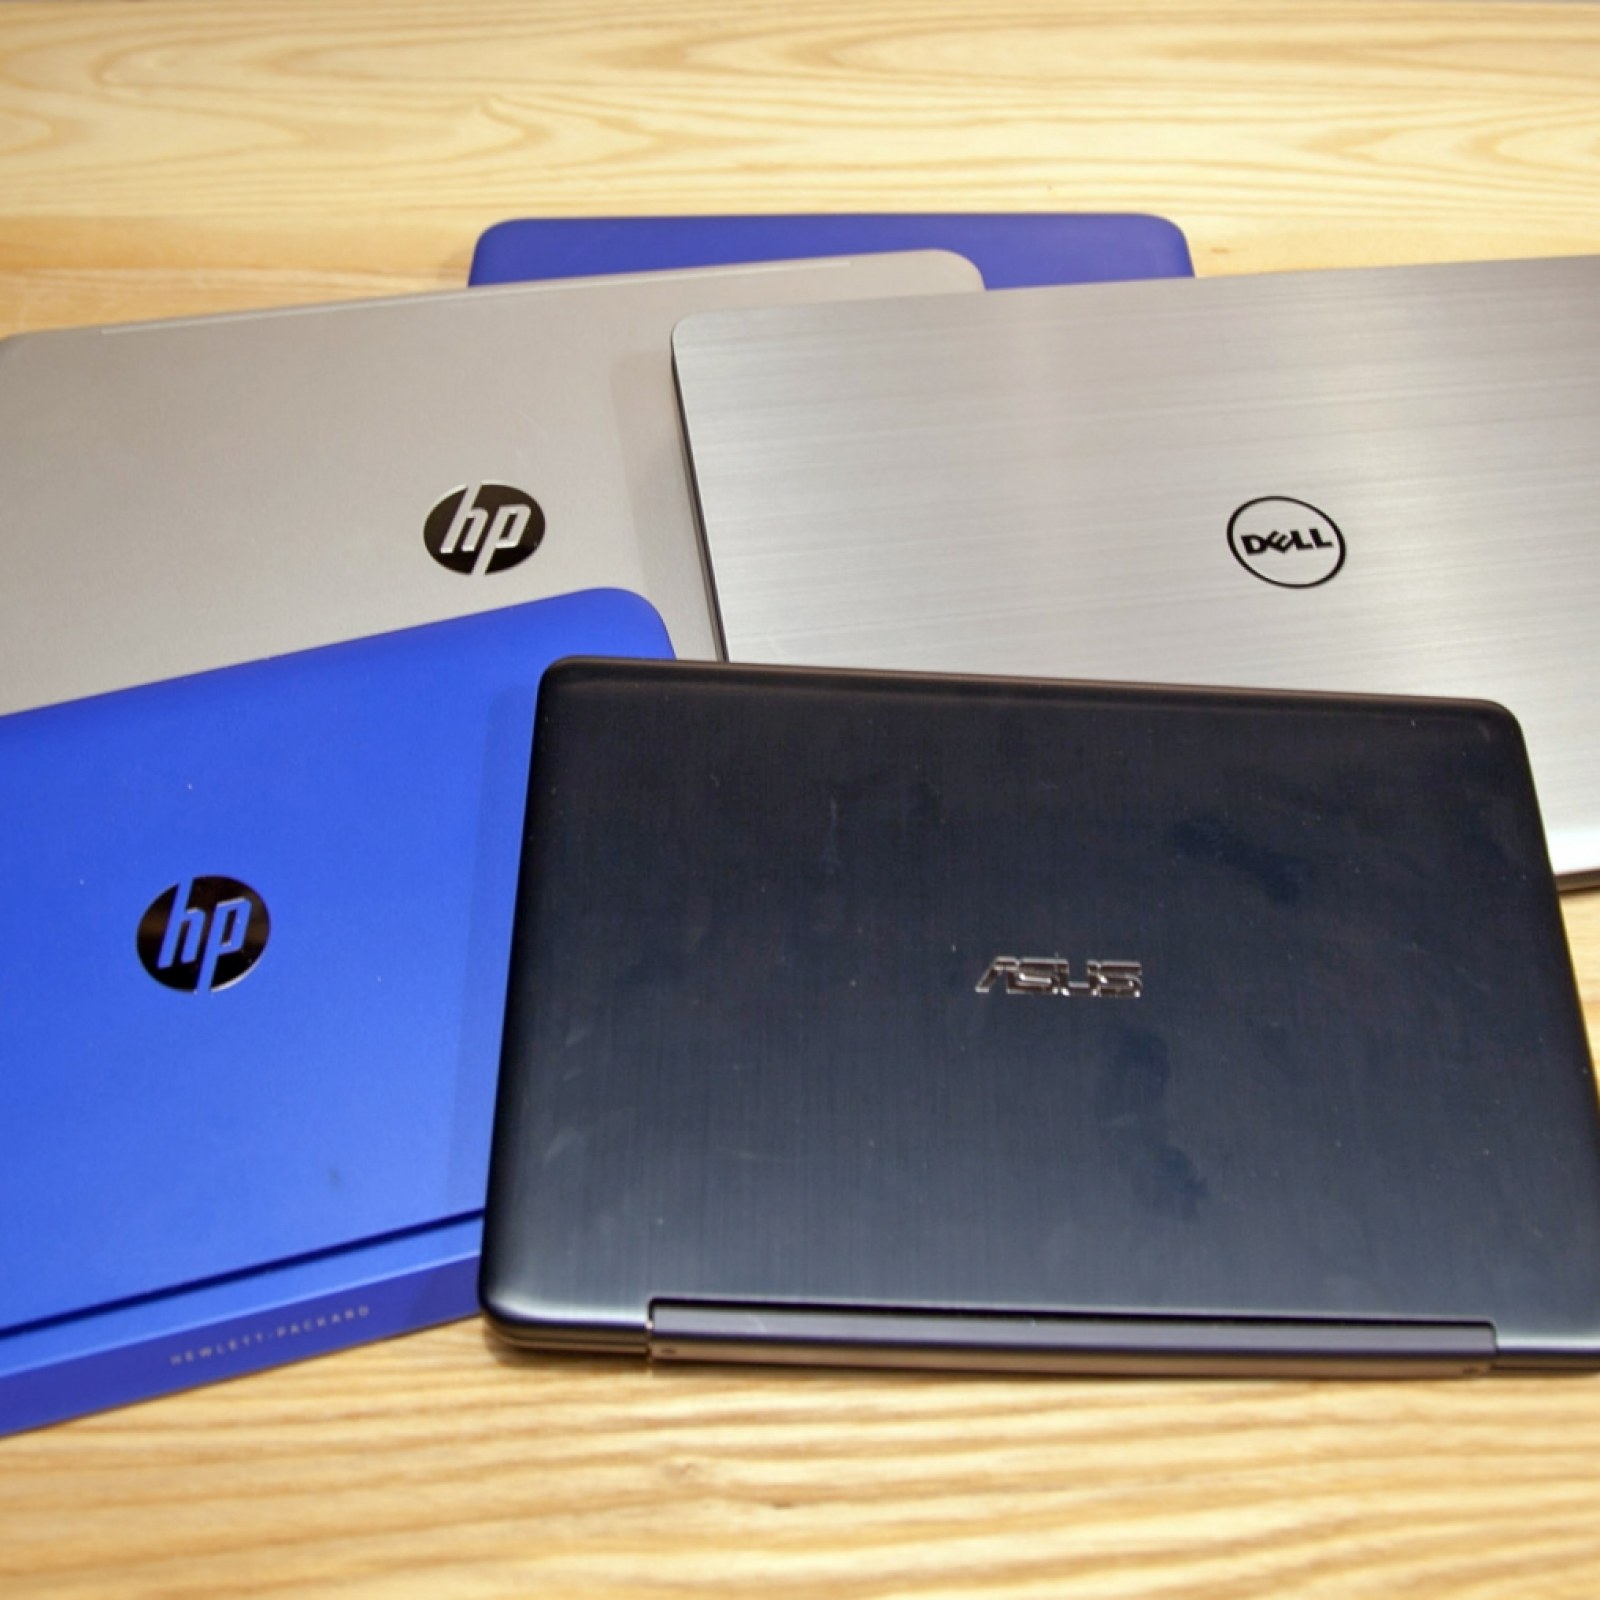 Critical flaws on HP, Dell, Acer, Asus and Lenovo laptops let hackers take  over in 10 minutes